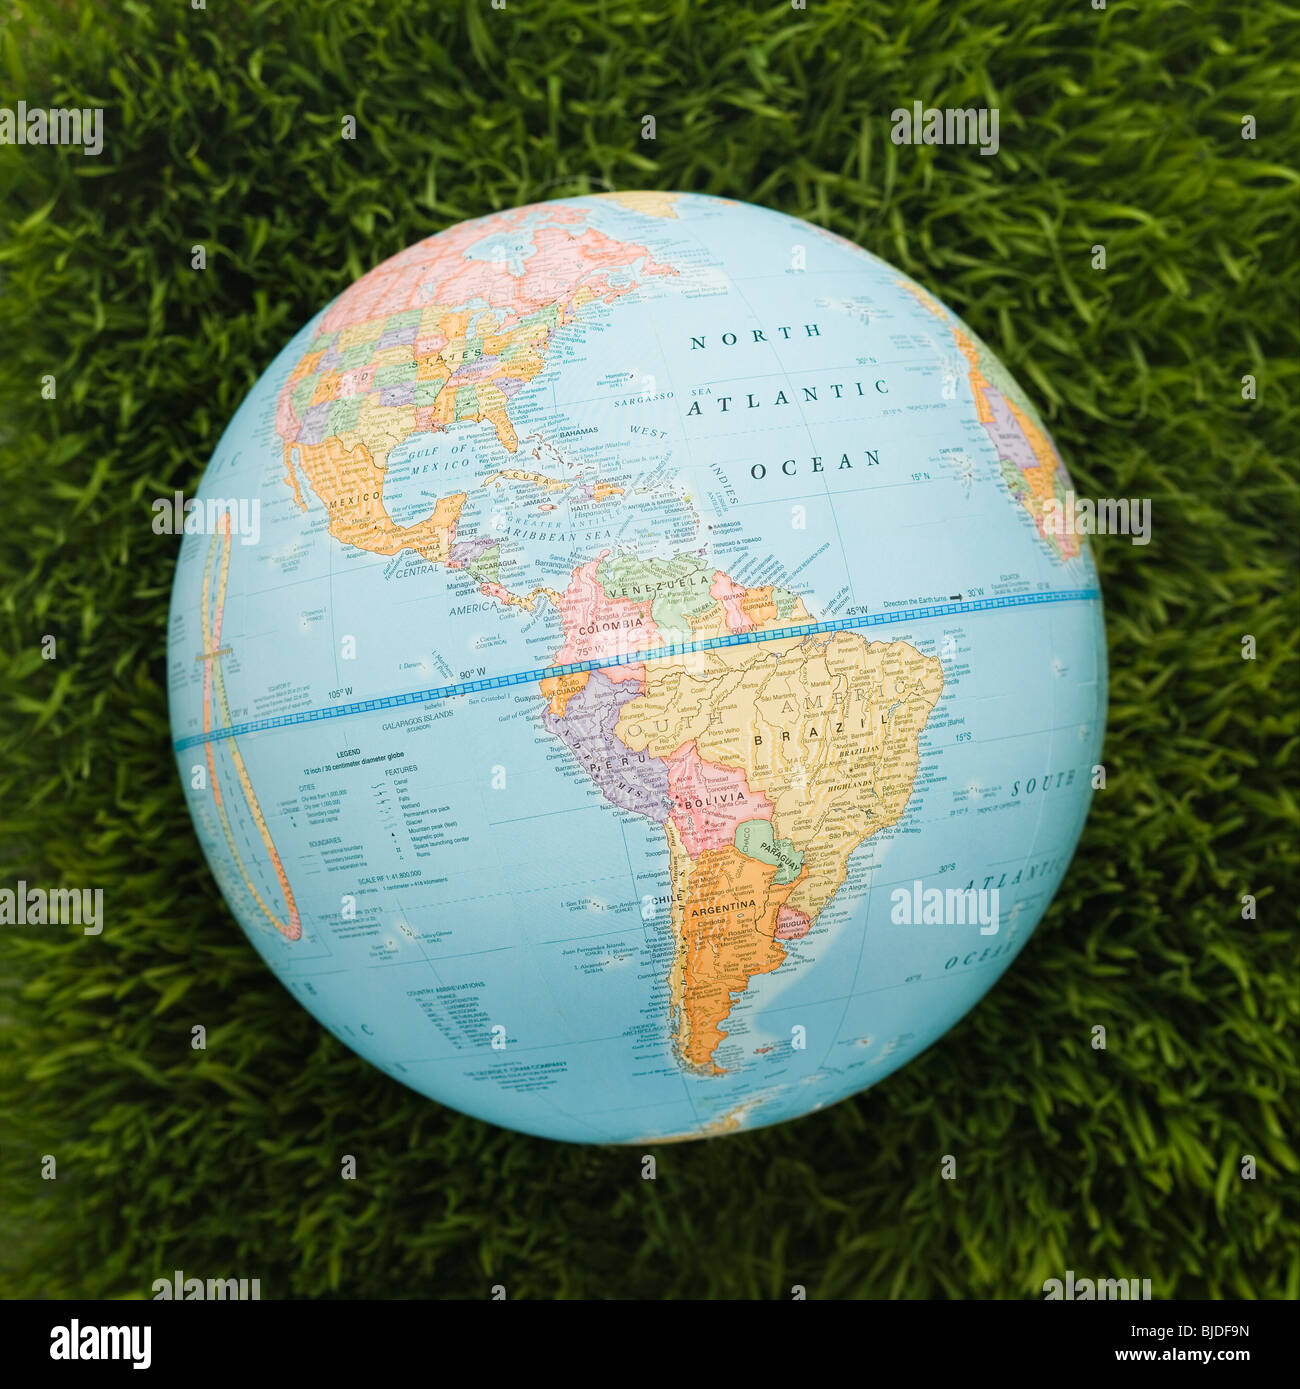 Globe against background of grass. Stock Photo